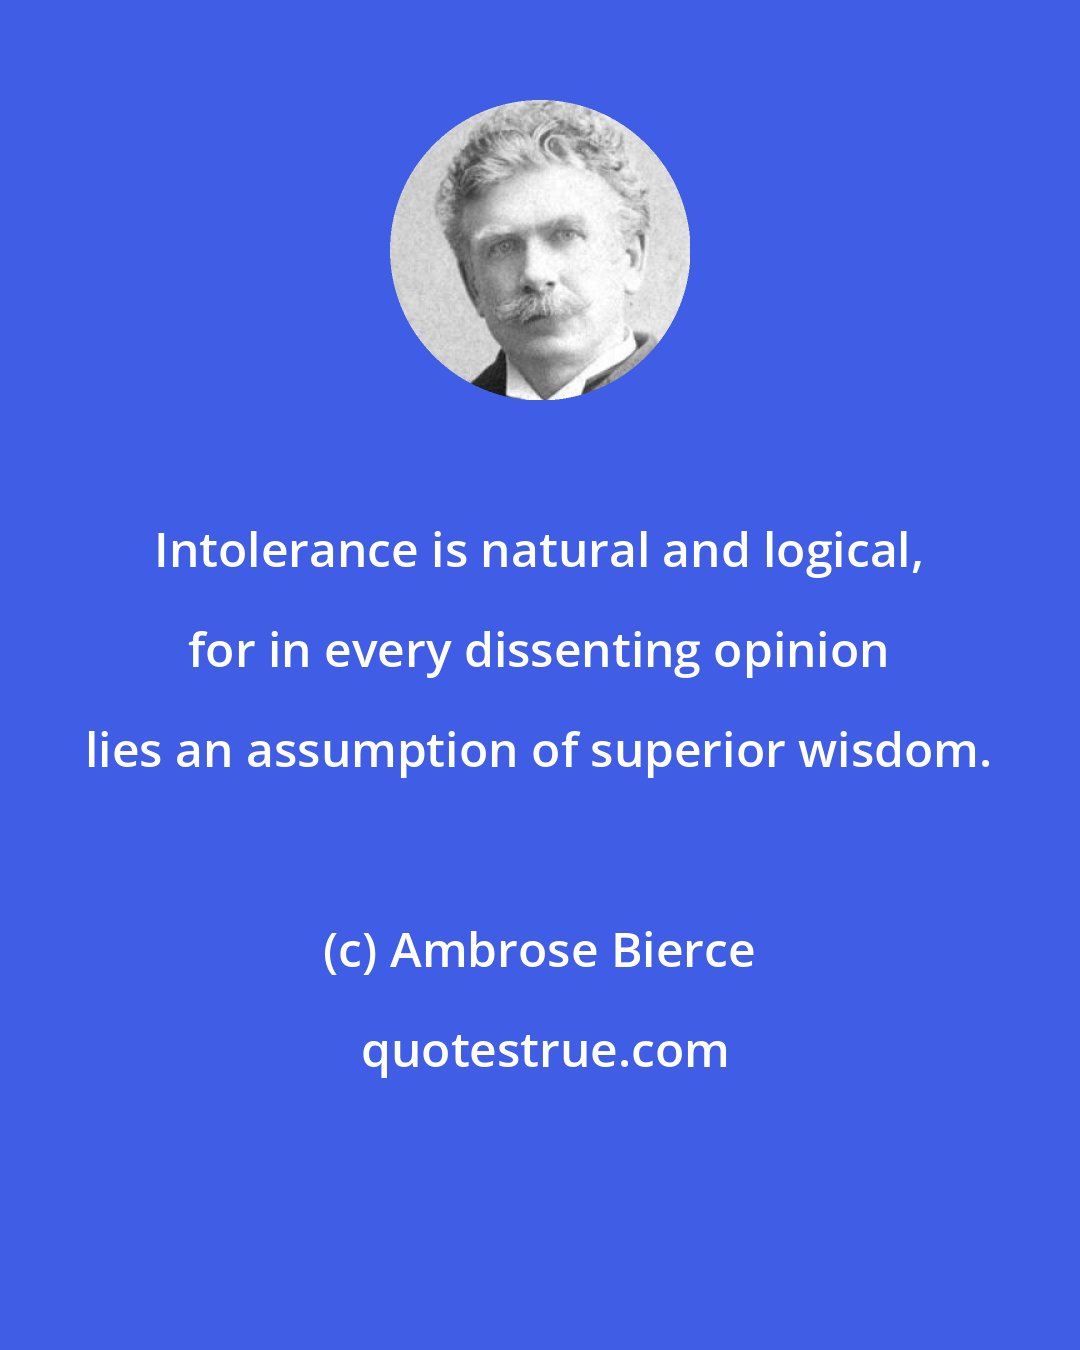 Ambrose Bierce: Intolerance is natural and logical, for in every dissenting opinion lies an assumption of superior wisdom.